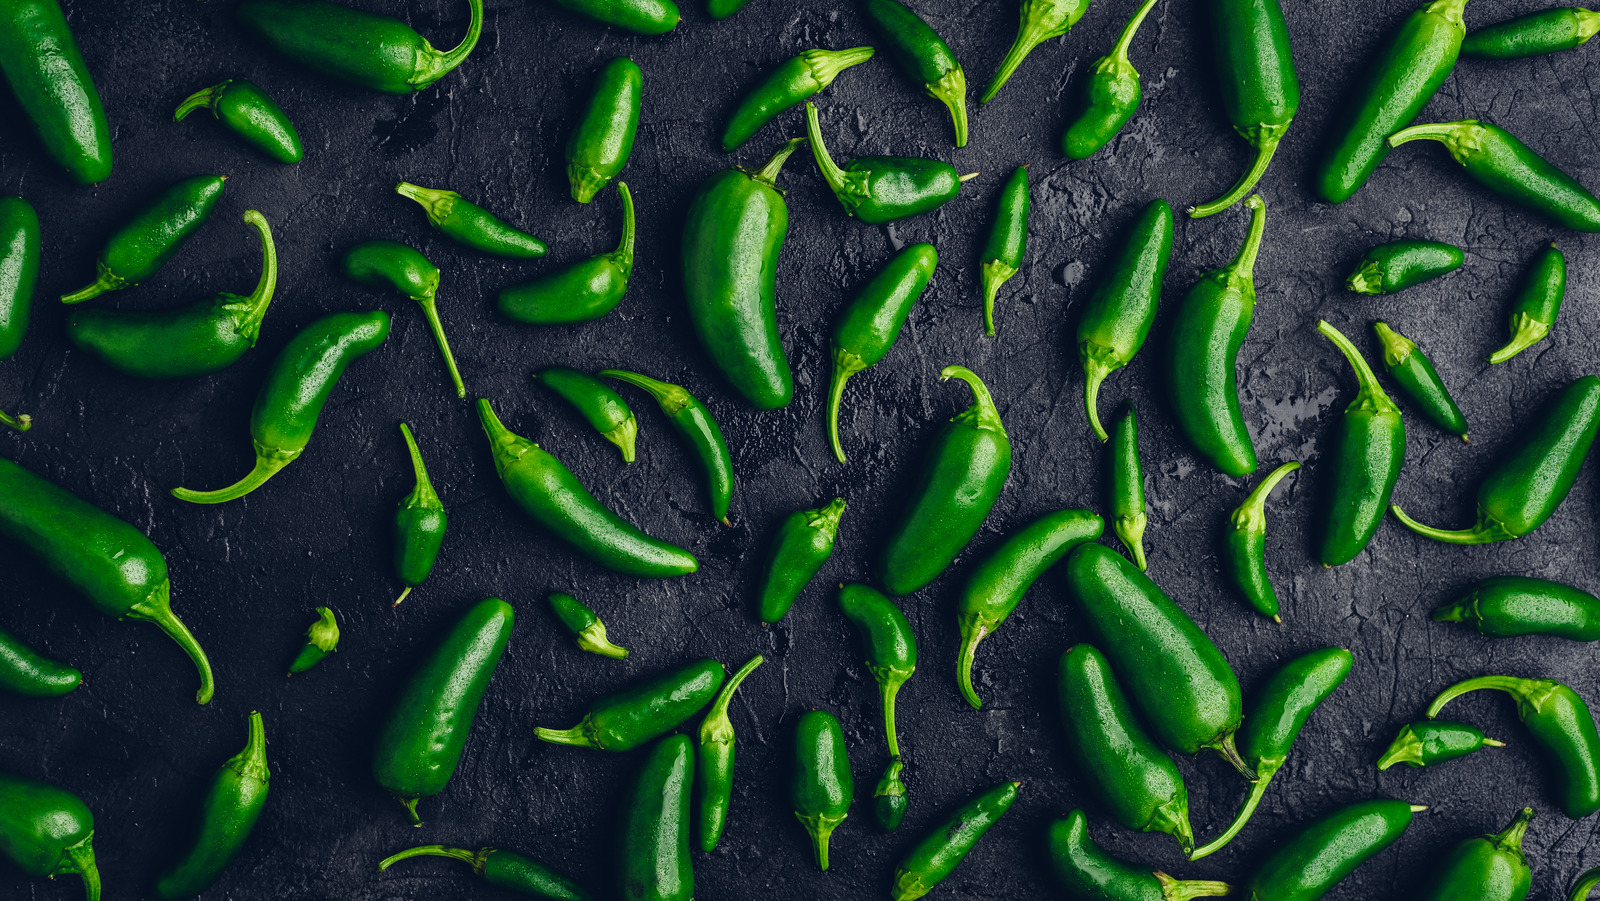 The Reason You Should Consider Eating More Jalapenos